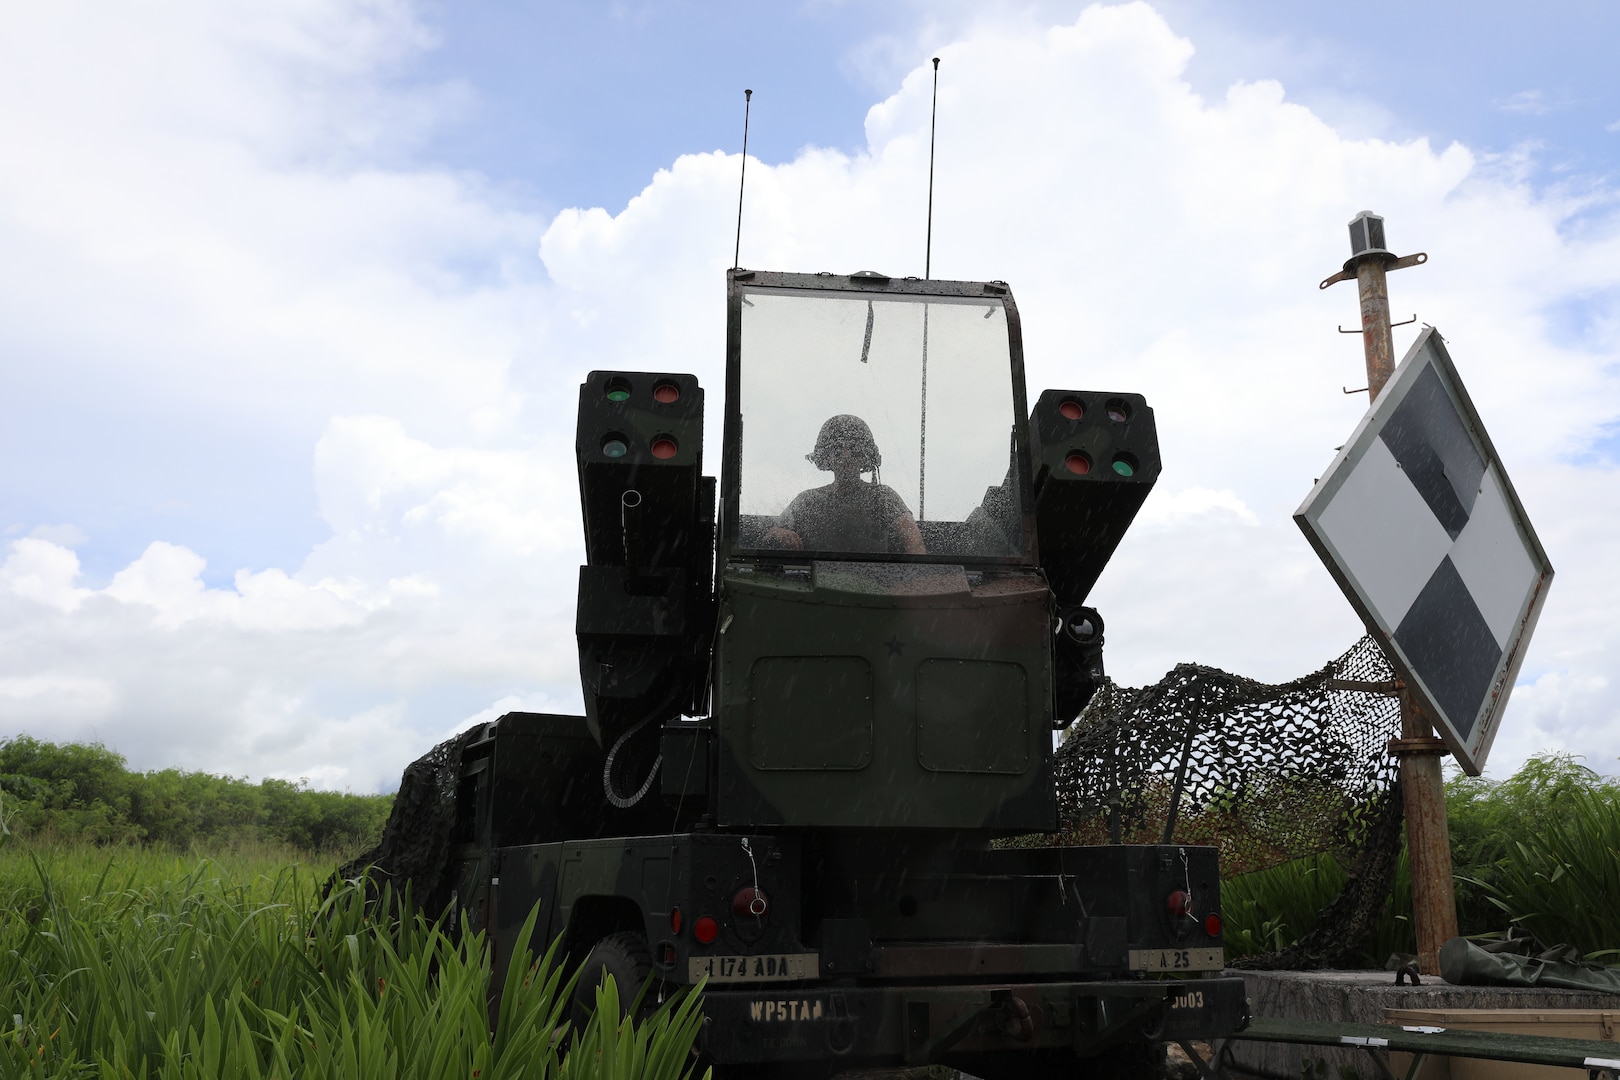 Ohio National Guard Pfc. Trey Risner, assigned to Charlie Battery, 1st Battalion, 174th Air Defense Artillery Regiment, prepares to operate the Avenger Air Defense System during exercise Forager 21 on July 30, 2021, in Tinian, Northern Mariana Islands. The self-propelled surface-to-air missile system provides mobile, short-range air defense protection for ground units.